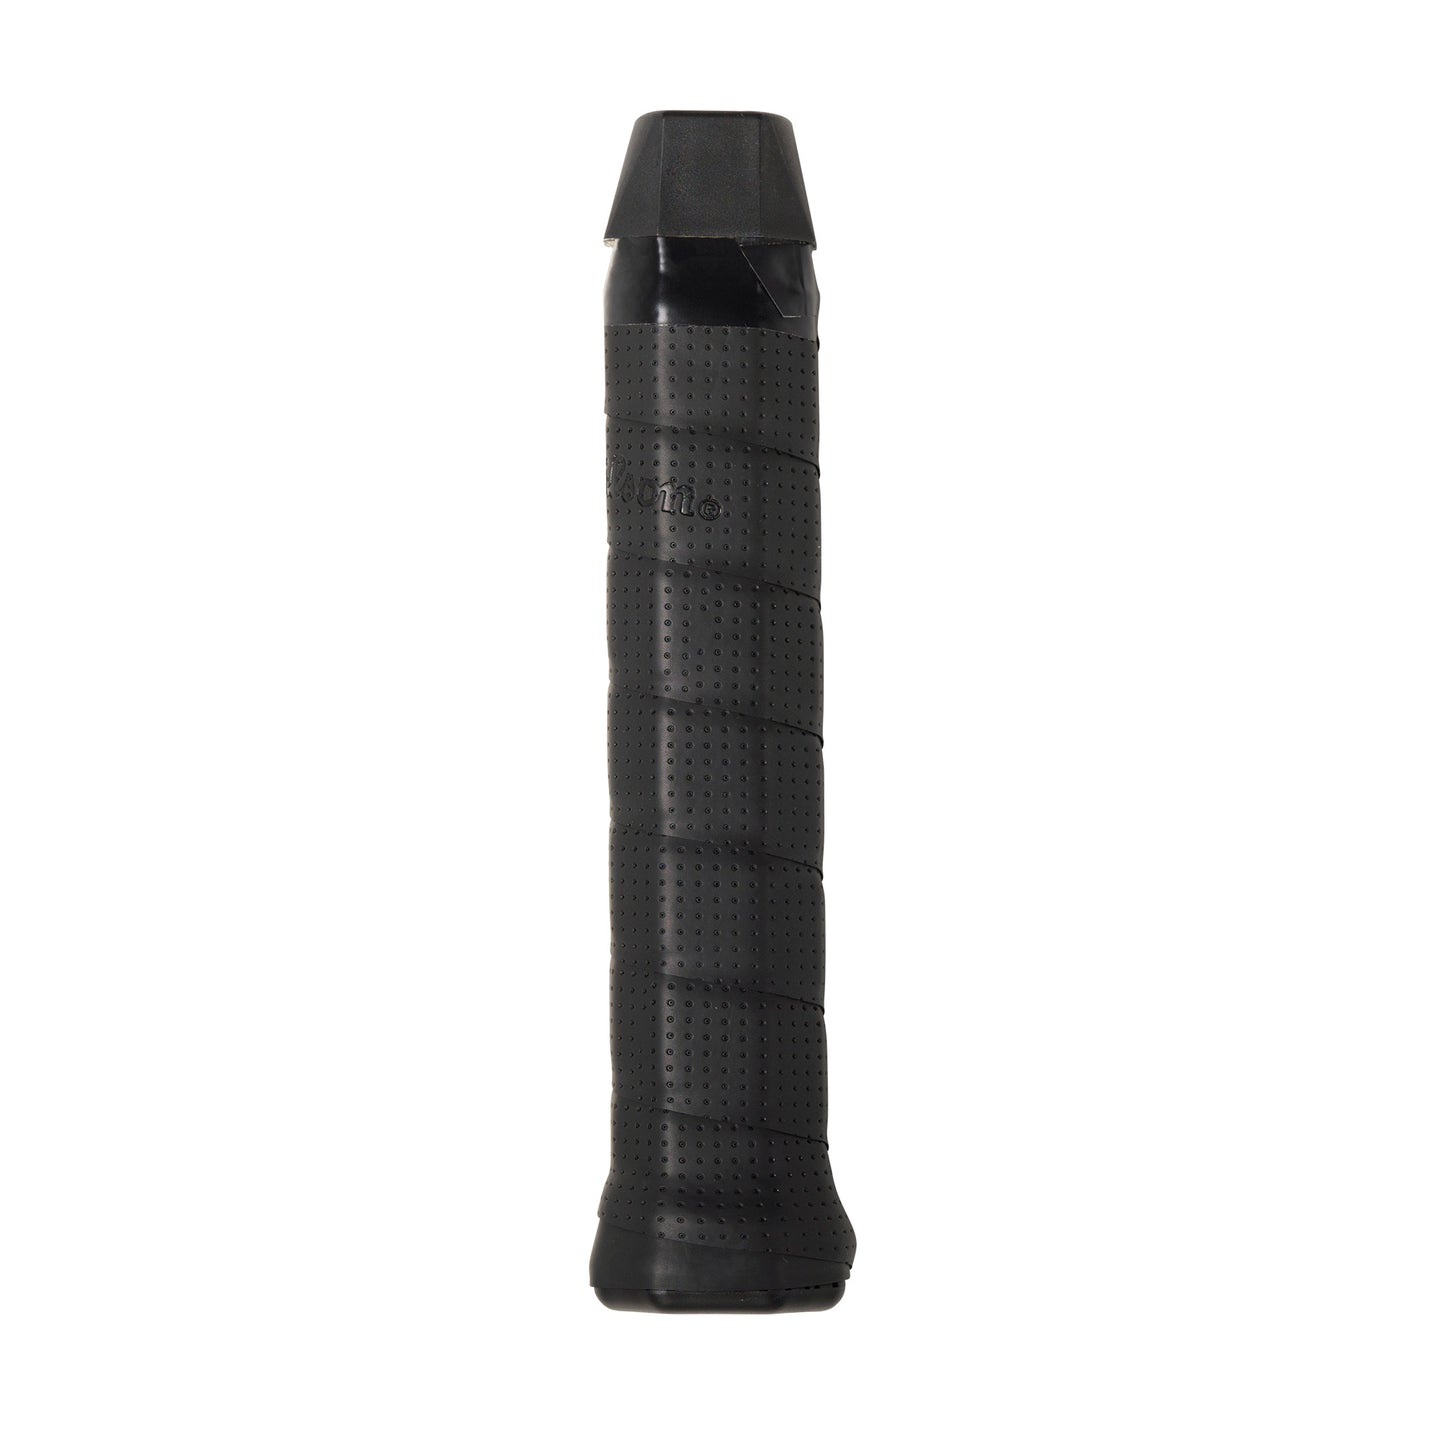 Wilson Dual Performance Anti-Microbial replacement grip